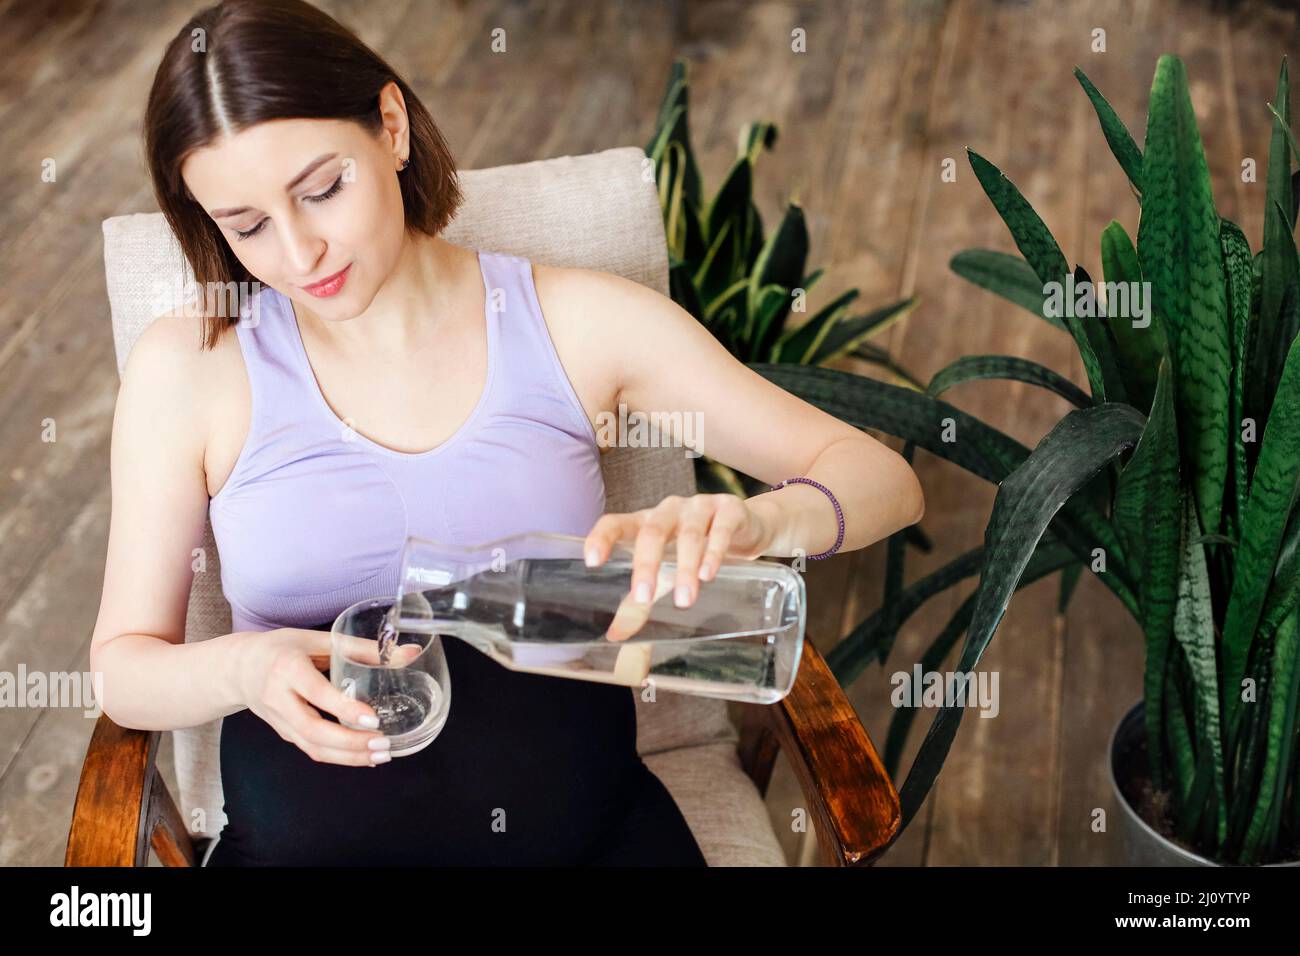 Hydration during pregnancy. Young pregnanat woman in t-shirt sitting on bed at home, drinking clean mineral water in morning to prevent dehydration. e Stock Photo